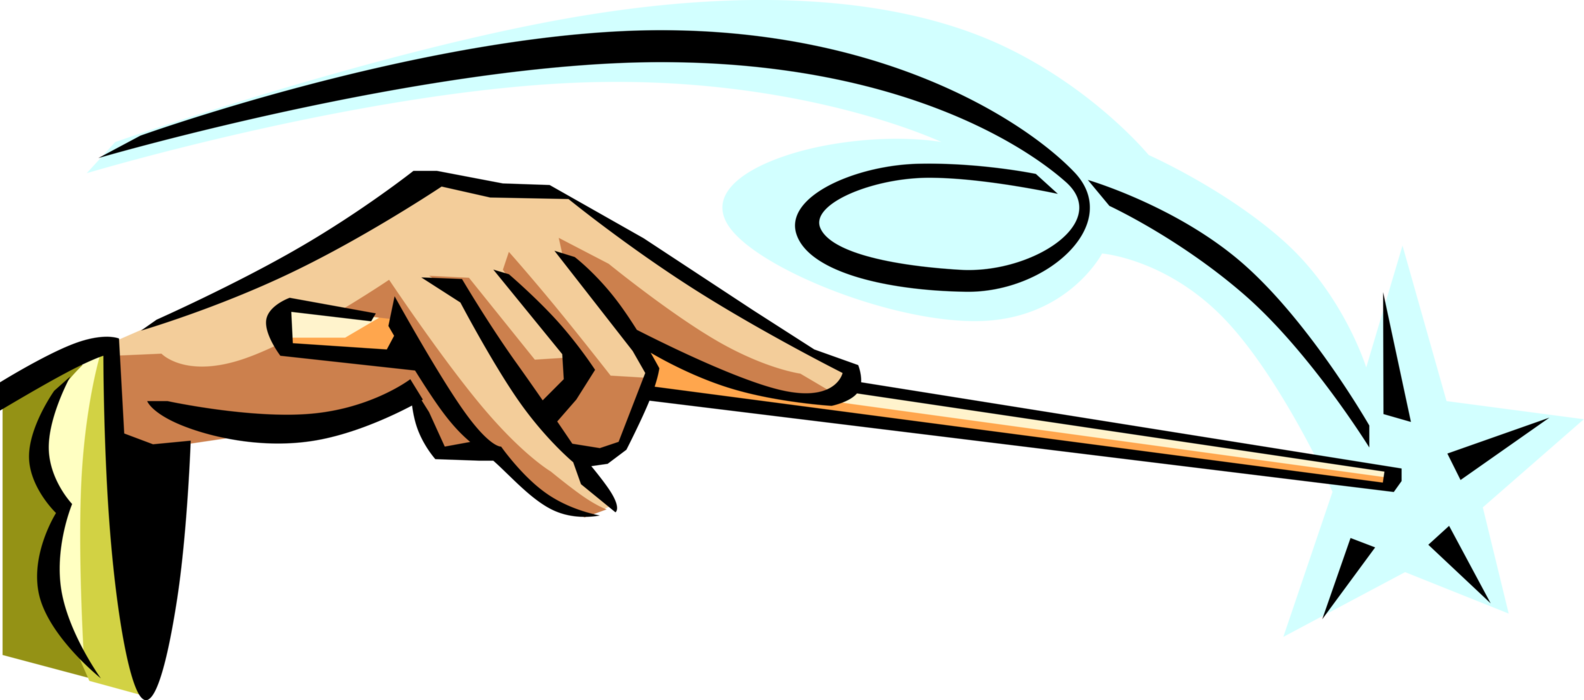 Vector Illustration of Magician's Hand Magic Wand Spell-Casting Tool